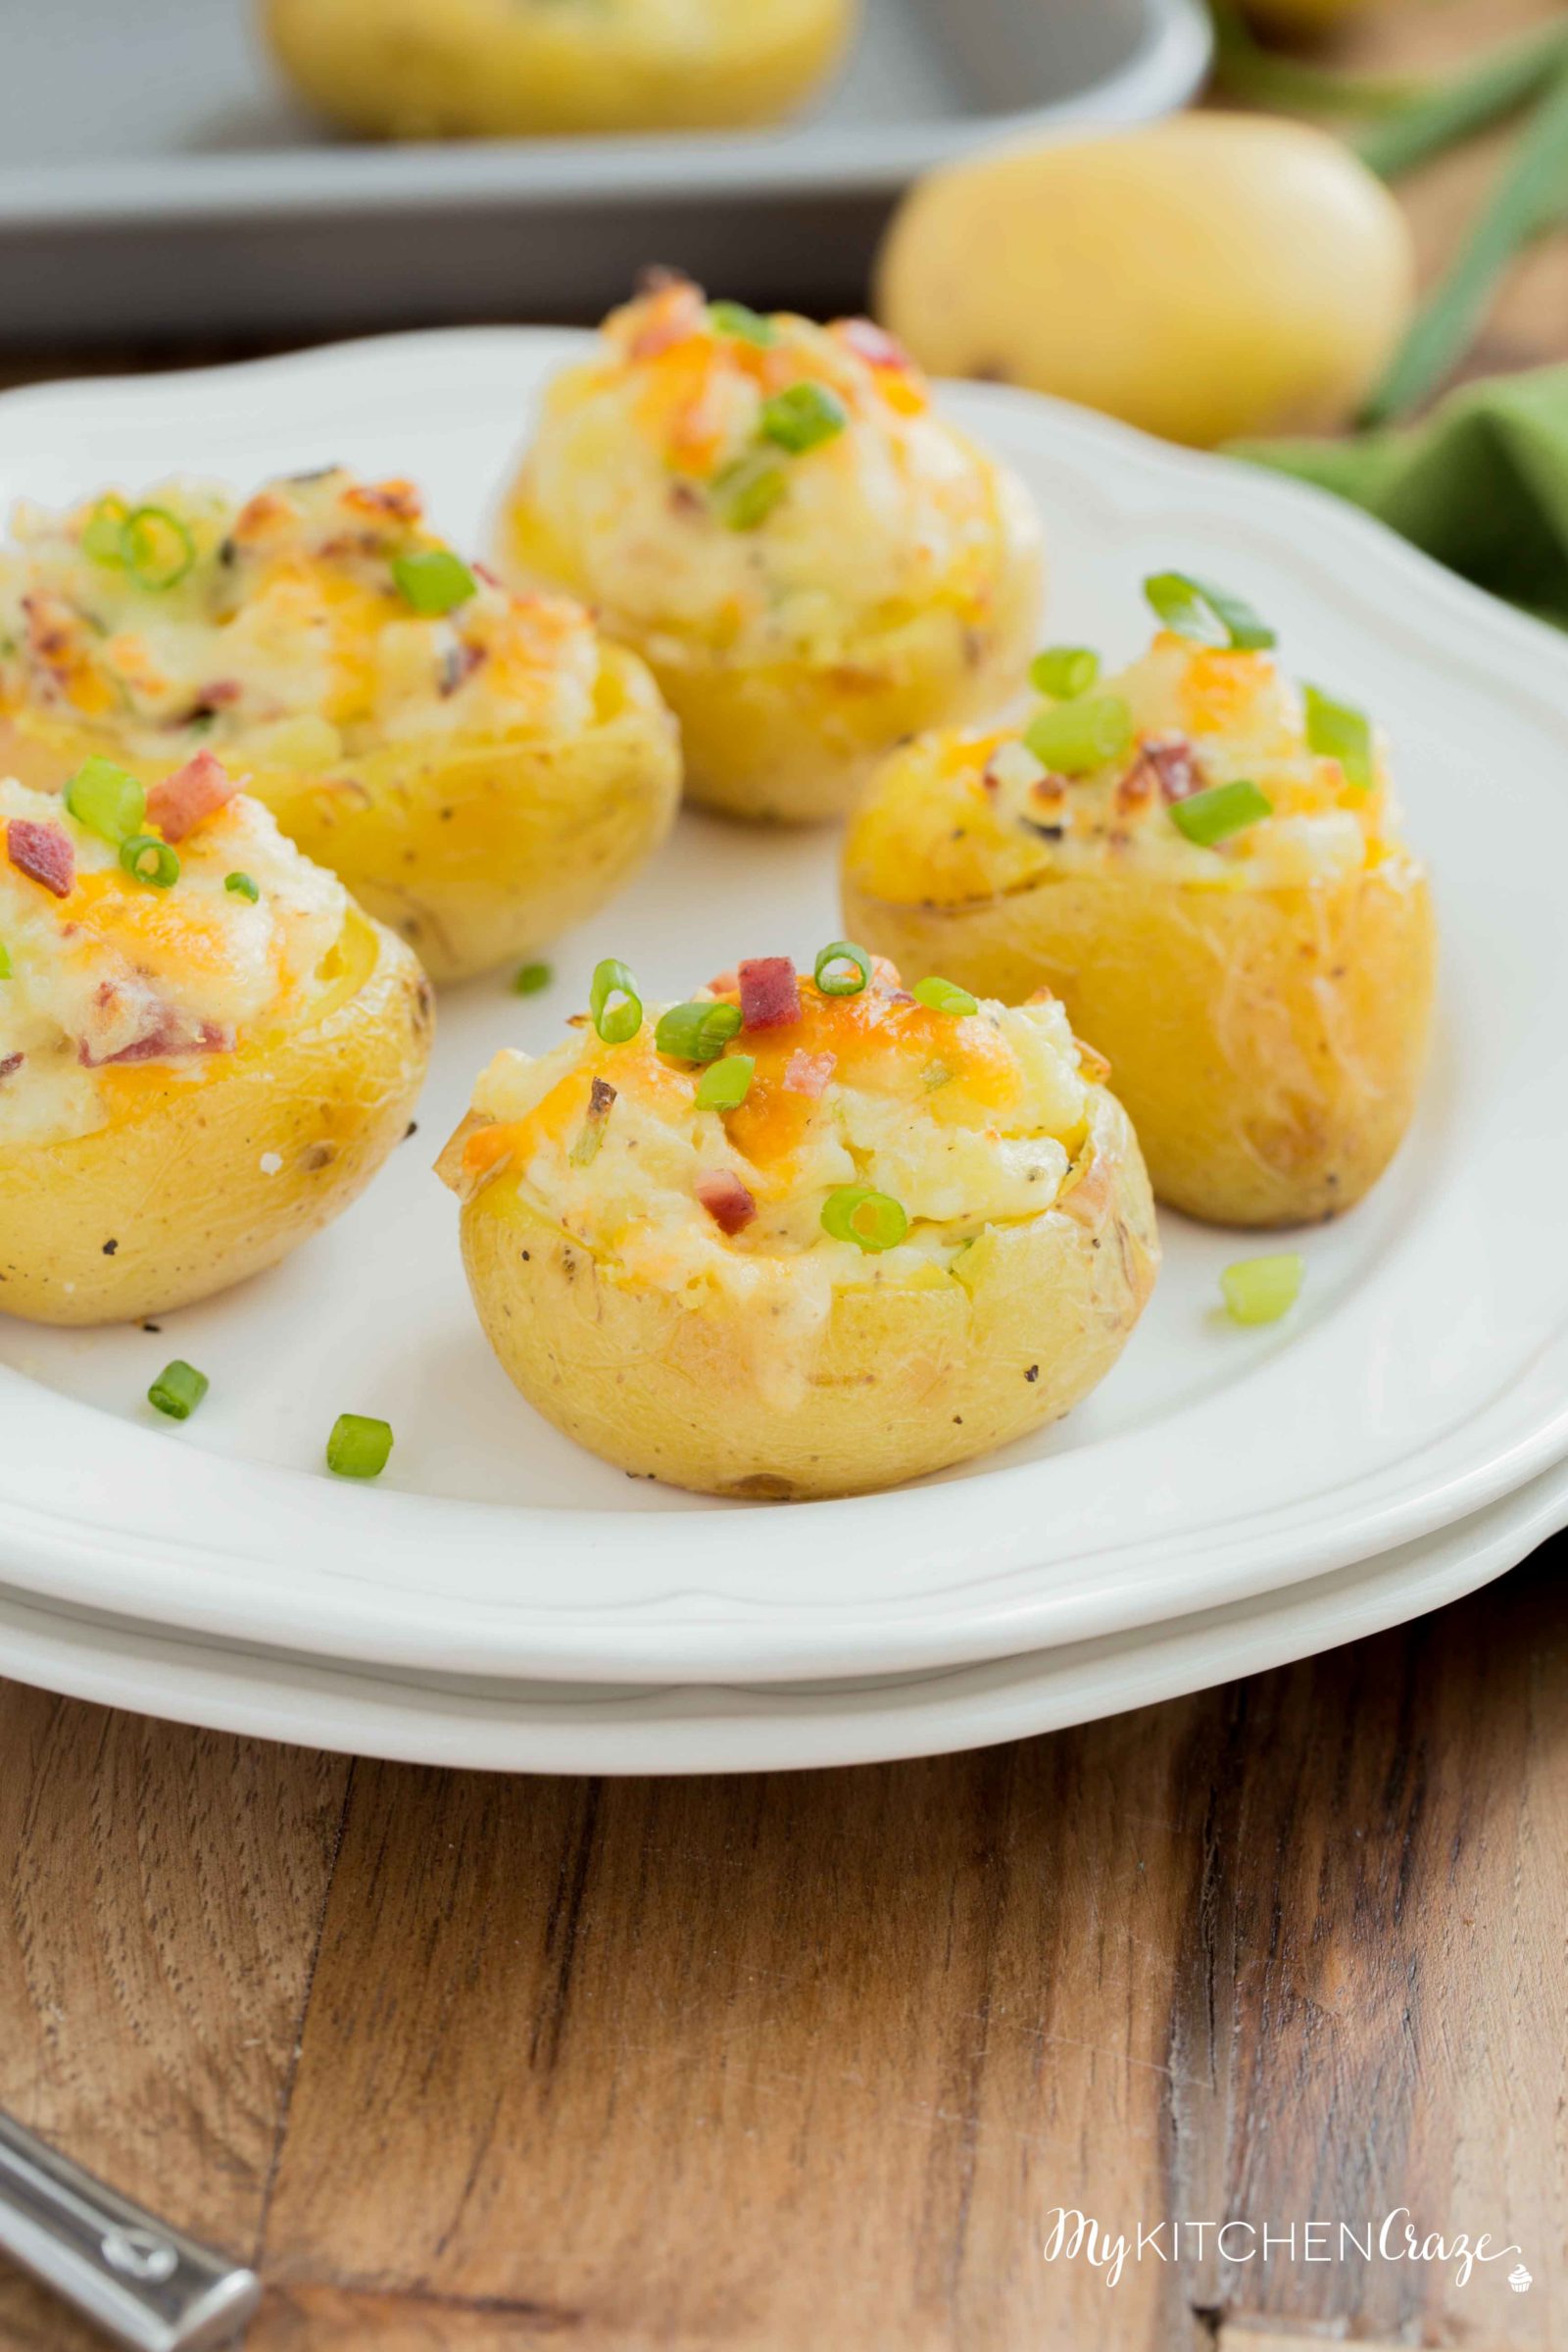 Mini Twice Baked Potatoes ~ Potatoes baked to perfection then loaded with bacon, green onions and cheese. All the yummy things you need for a side! These mini twice baked potatoes are the perfect side.